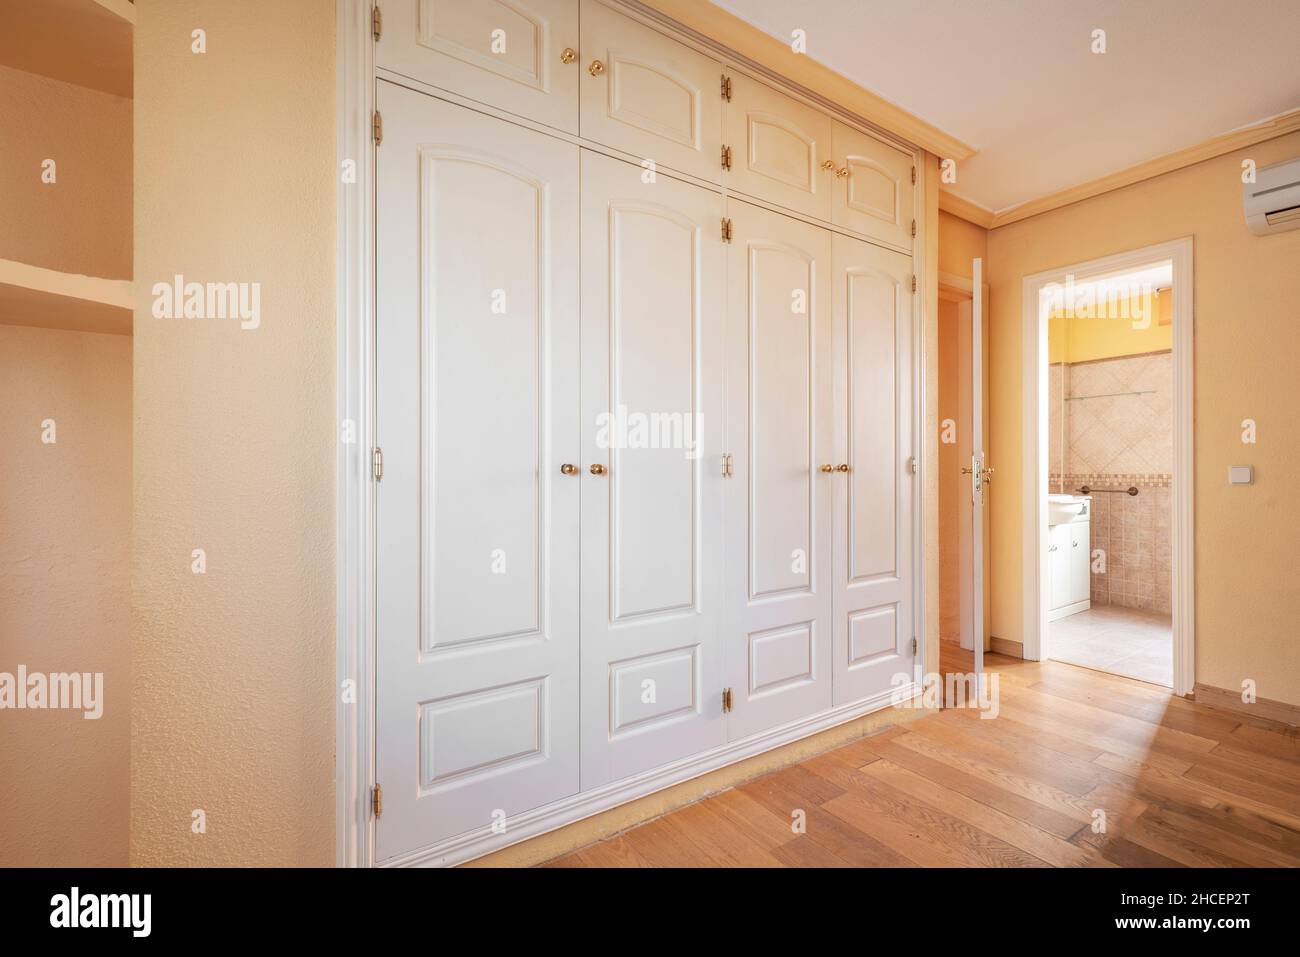 Bedroom with white walk-in closet and en-suite bathroom with parquet flooring Stock Photo